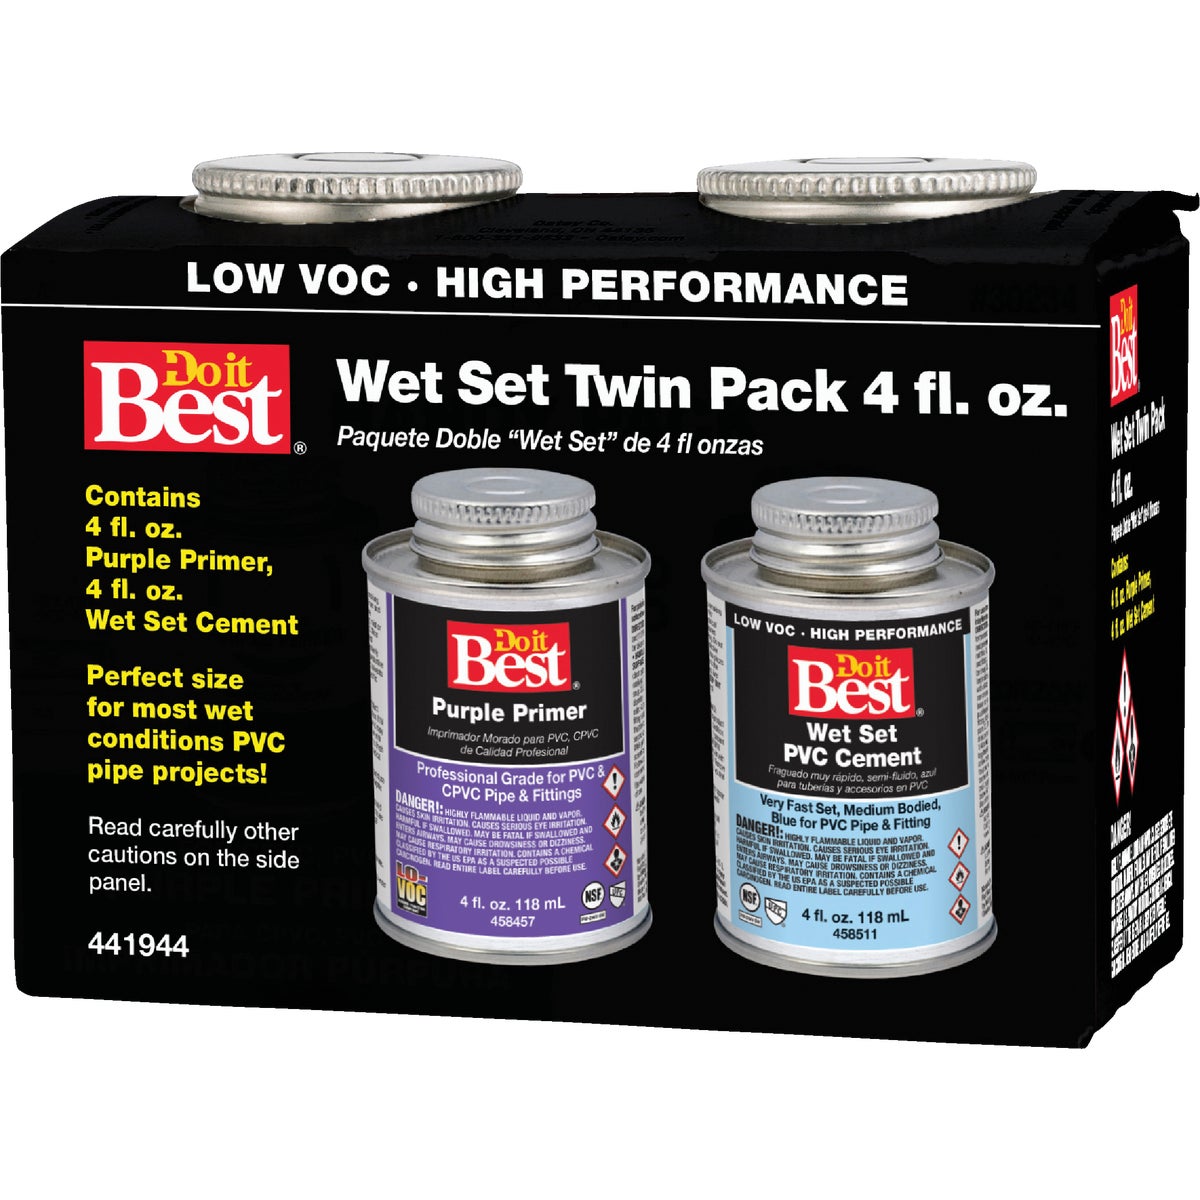 Item 441944, Do it Best offers convenience with this handy primer and wet set PVC twin 